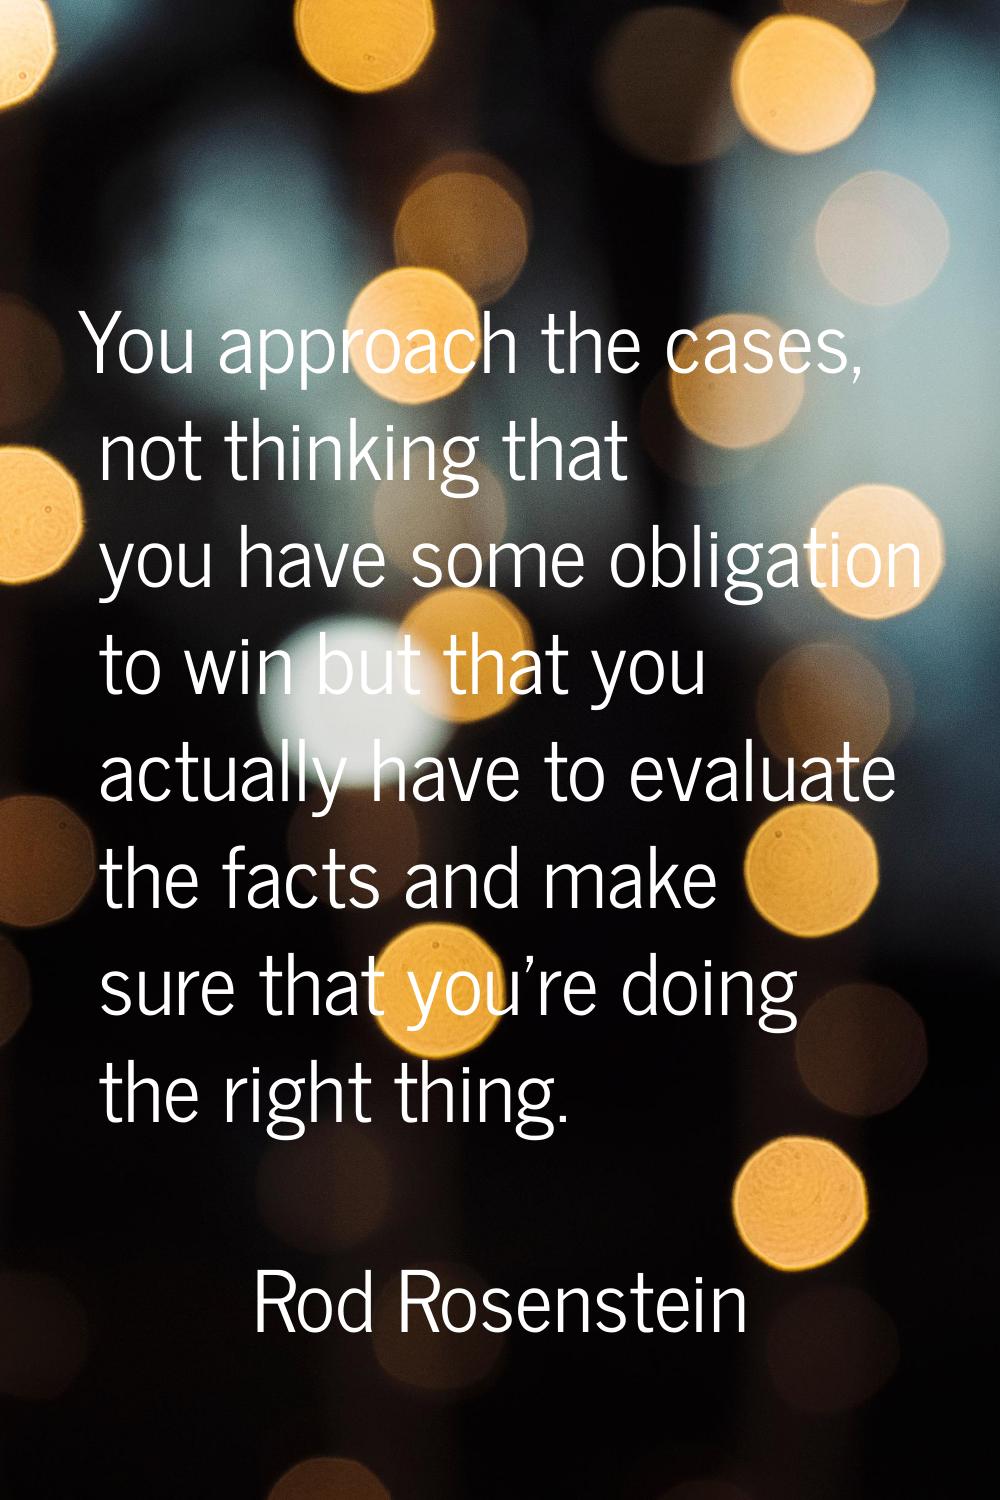 You approach the cases, not thinking that you have some obligation to win but that you actually hav